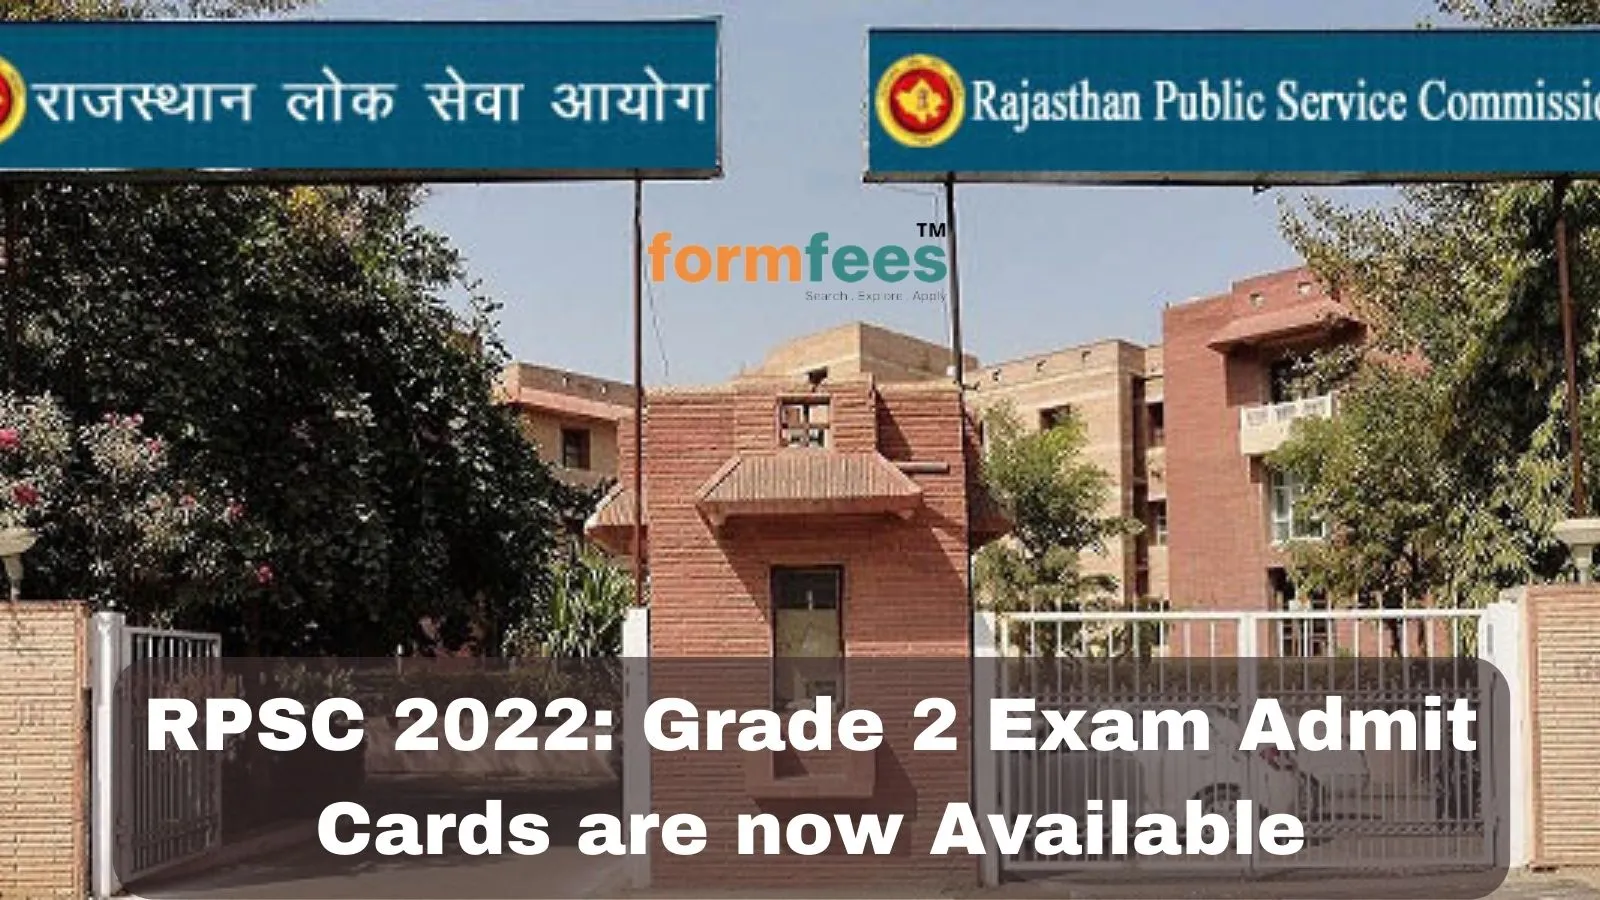 RPSC 2022: Grade 2 Exam Admit Cards are now Available